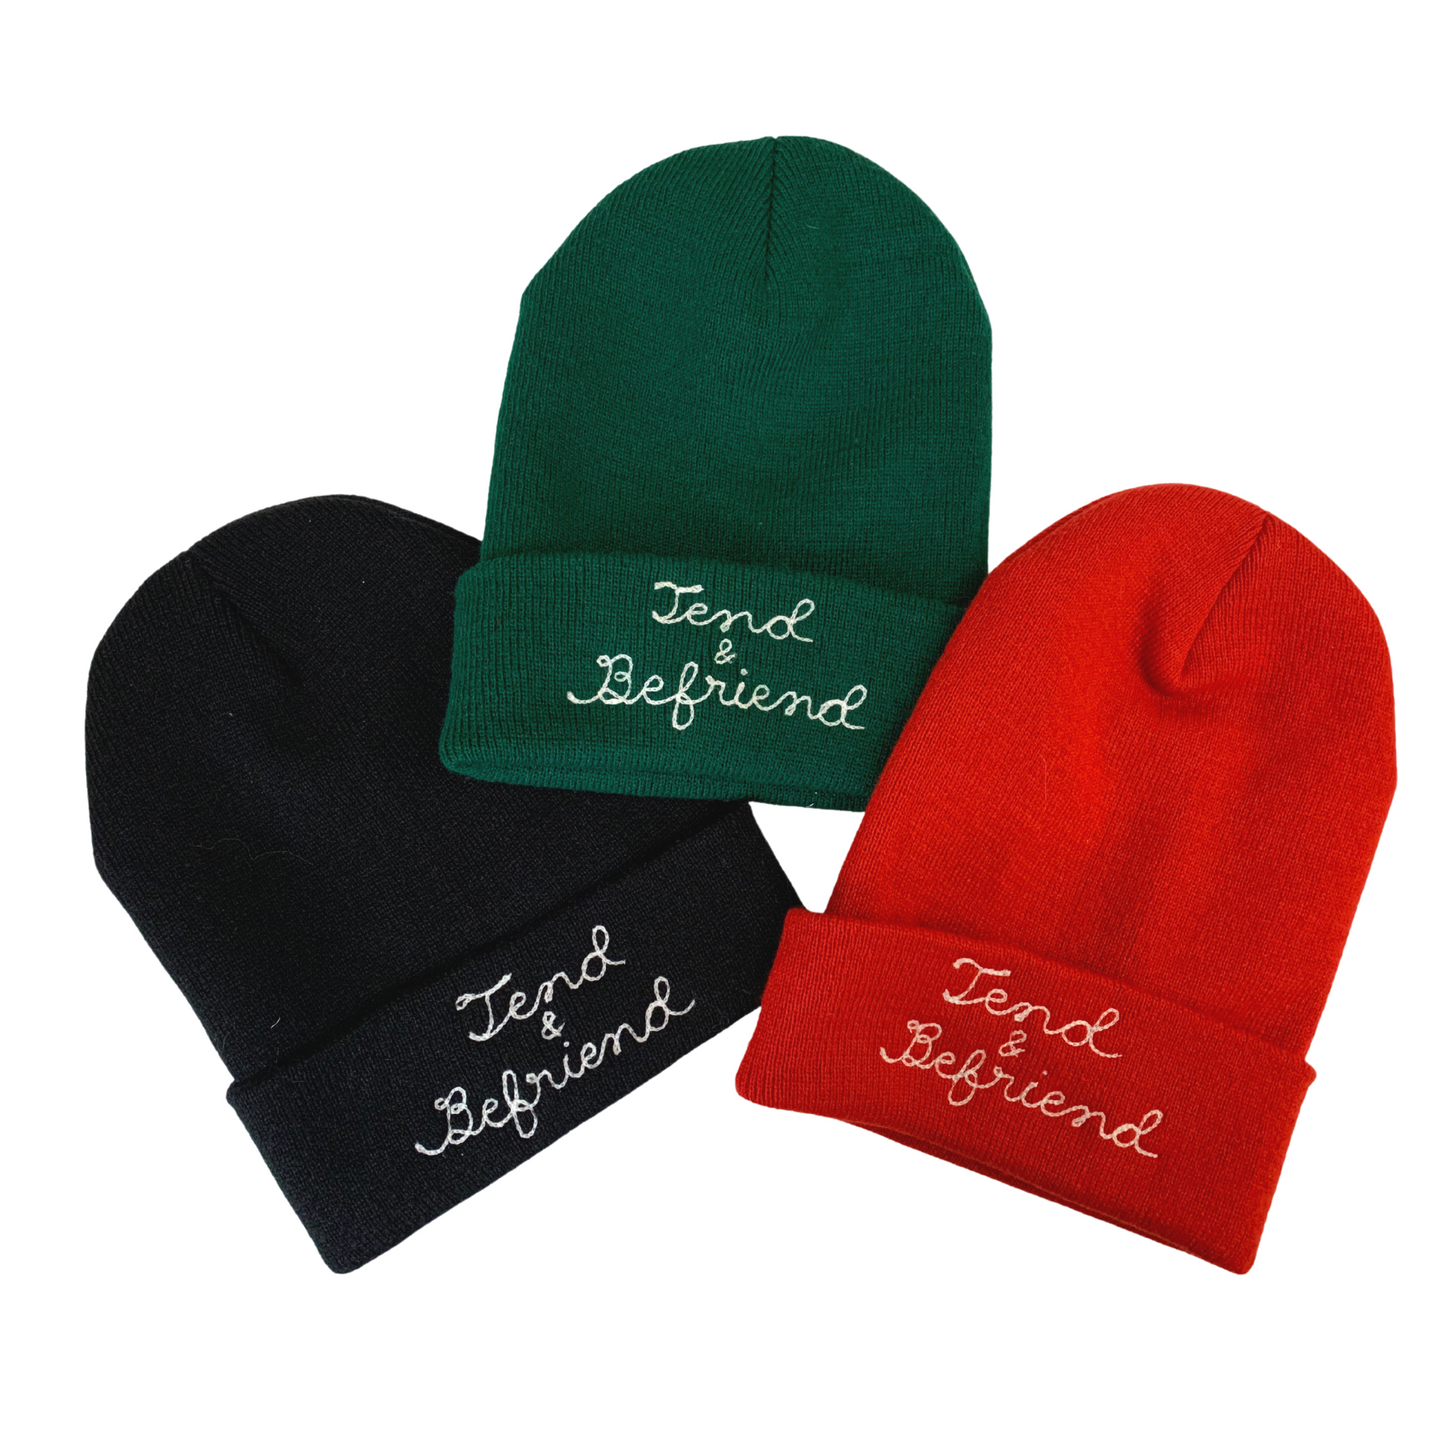 The Adult Chainstitch Beanie - Red